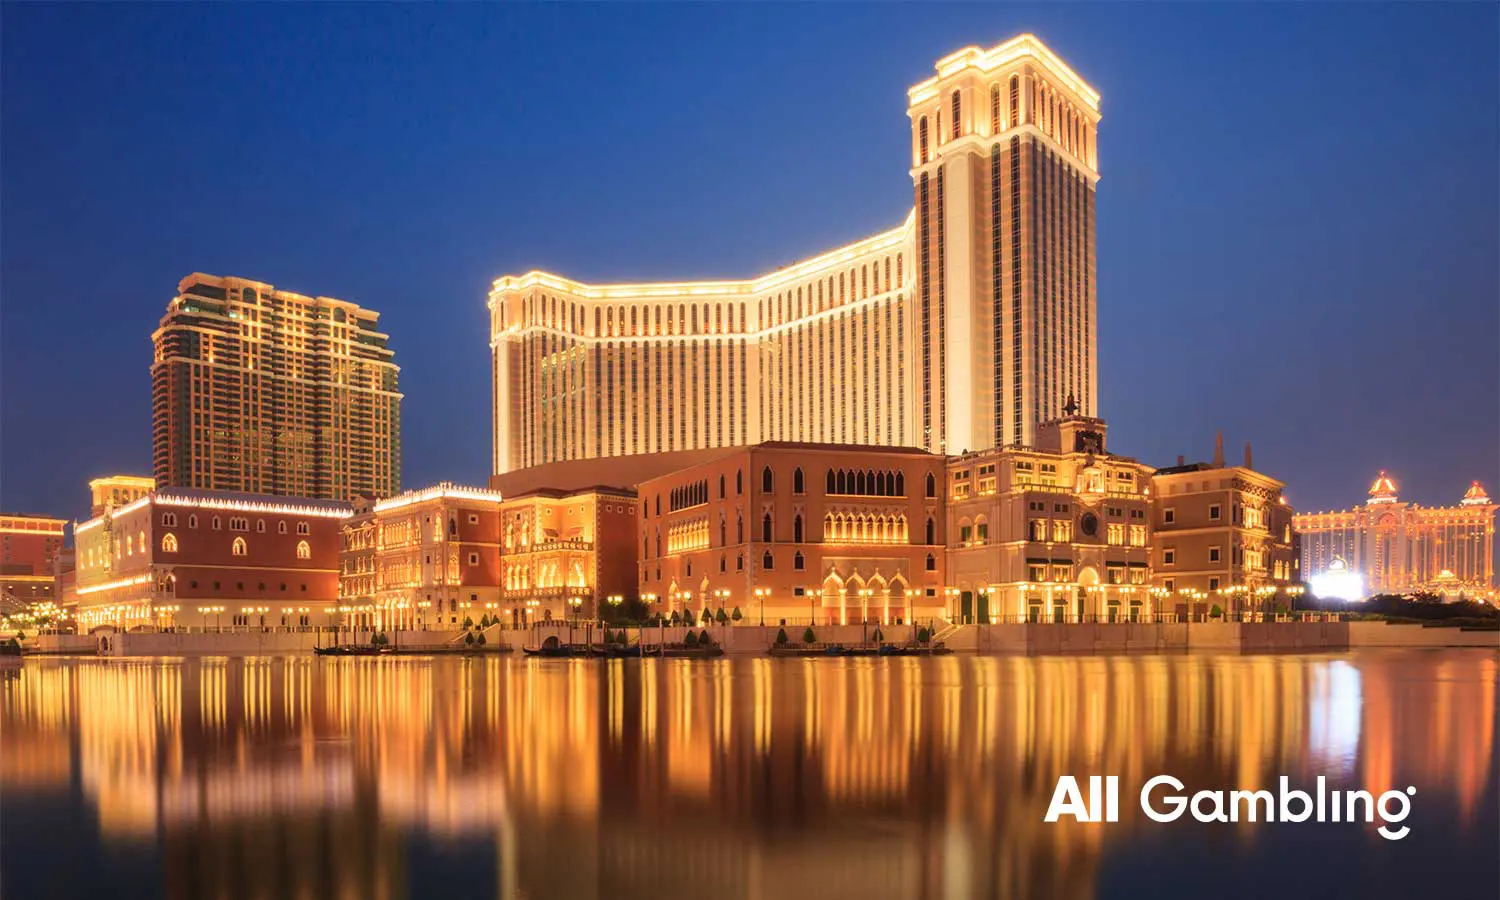 The largest casino in Asia